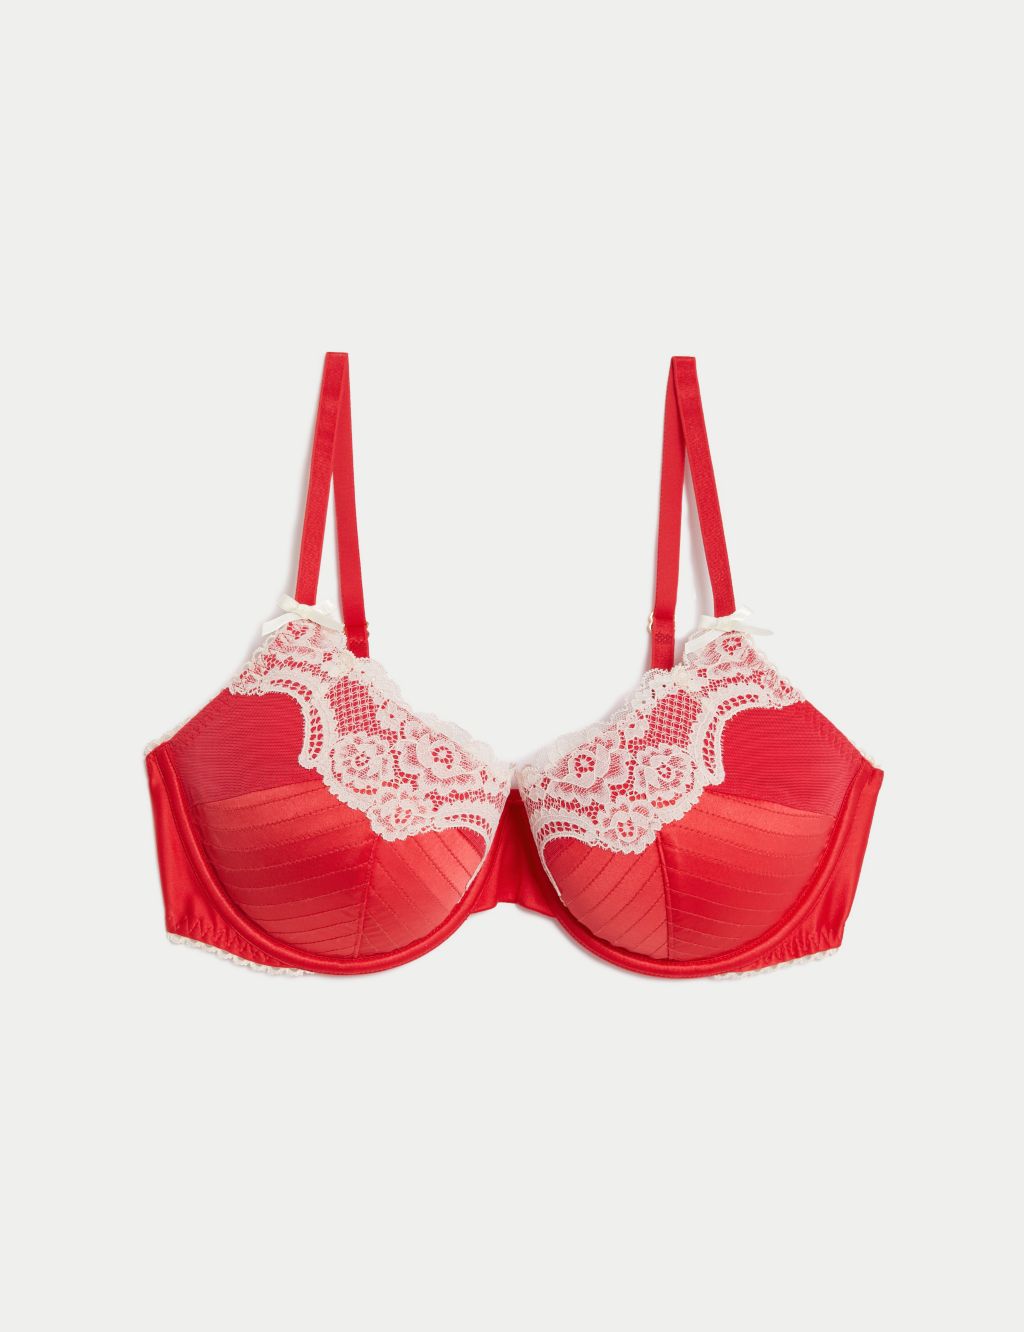 CHAINSTORE RED LACE UNDERWIRED MOULDED PUSH UP BALCONY BRA SIZE 34B CUP